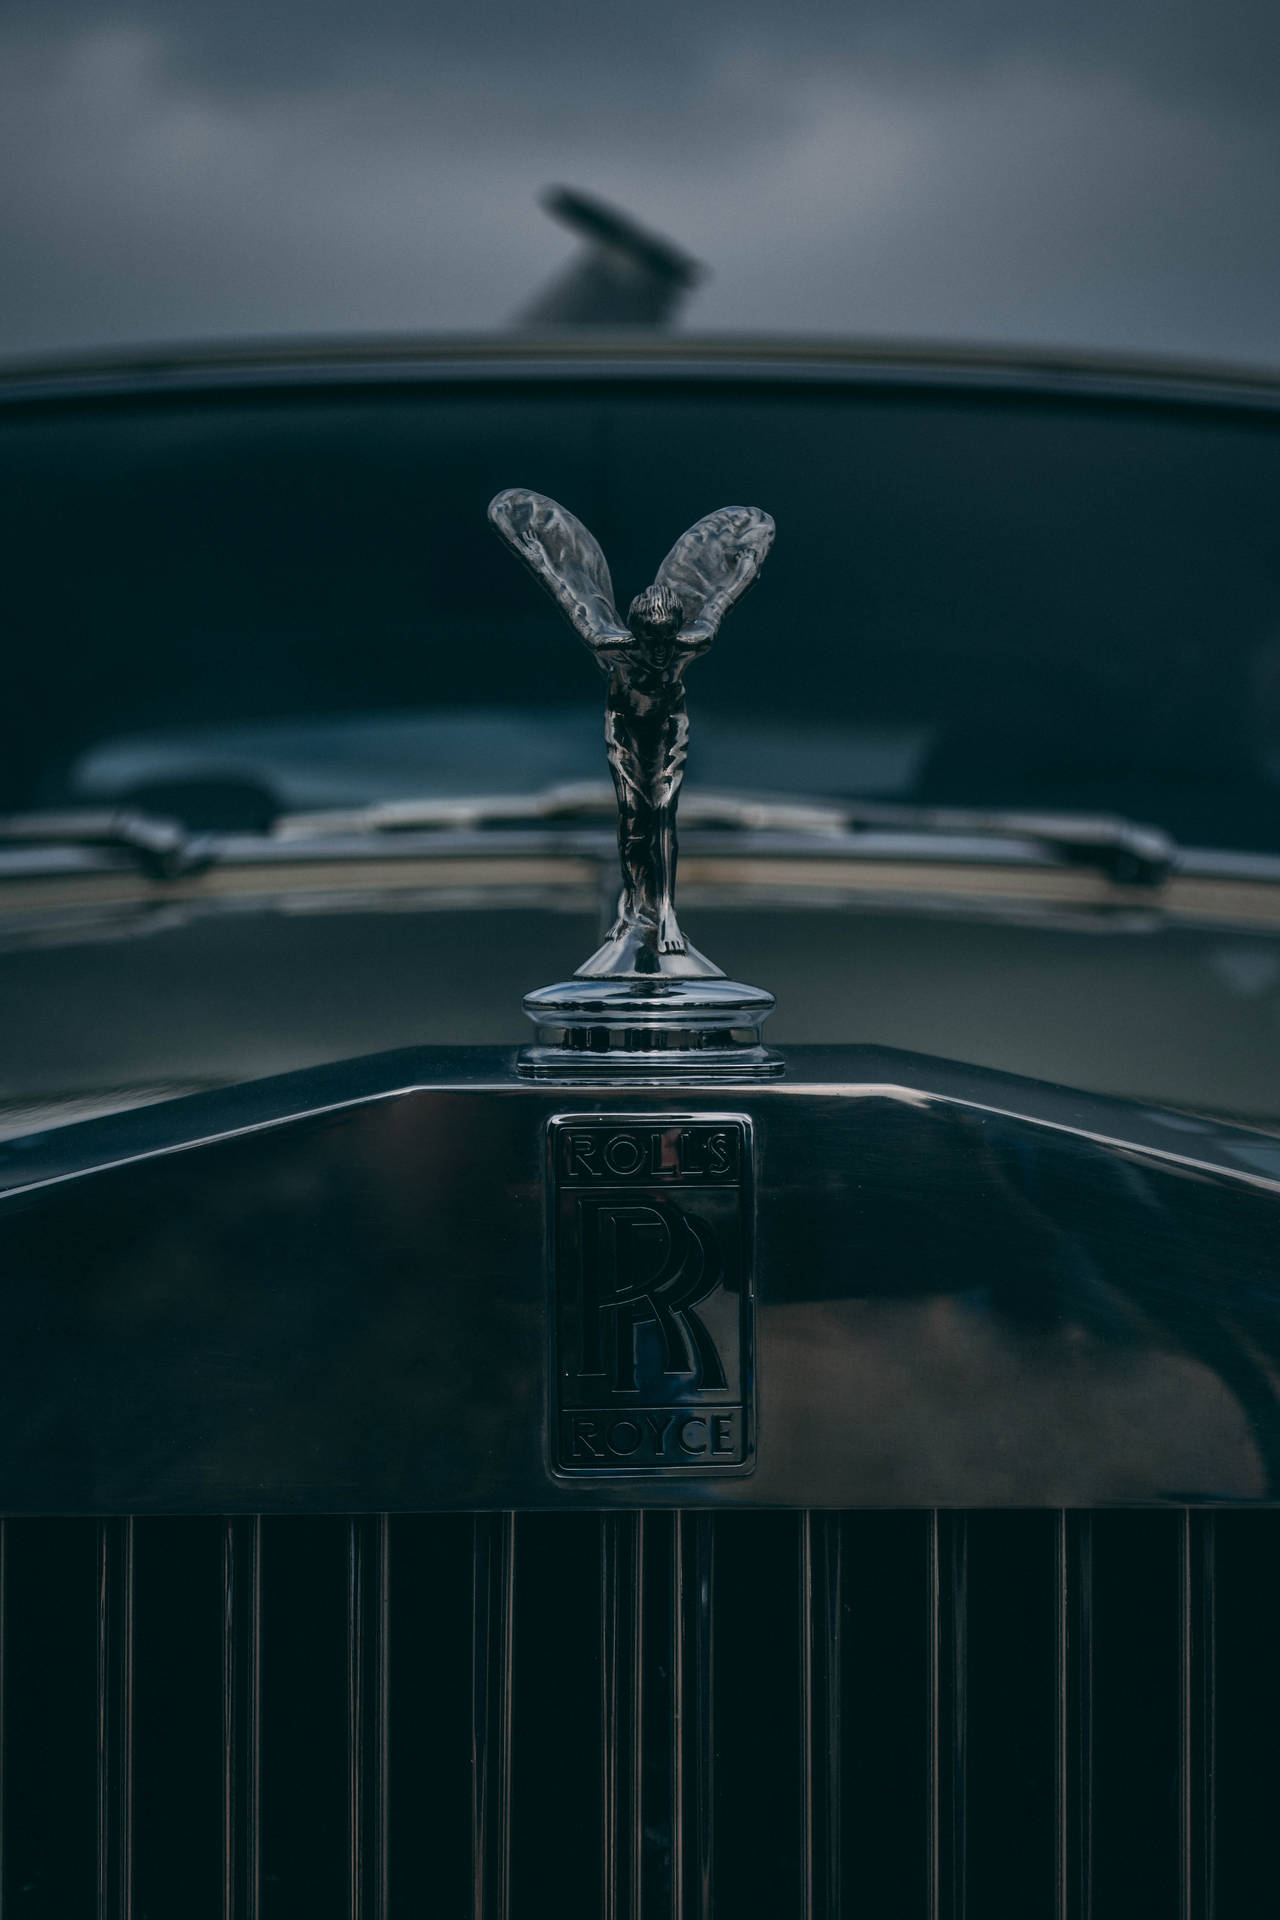 3811X5716 Rolls Royce Wallpaper and Background